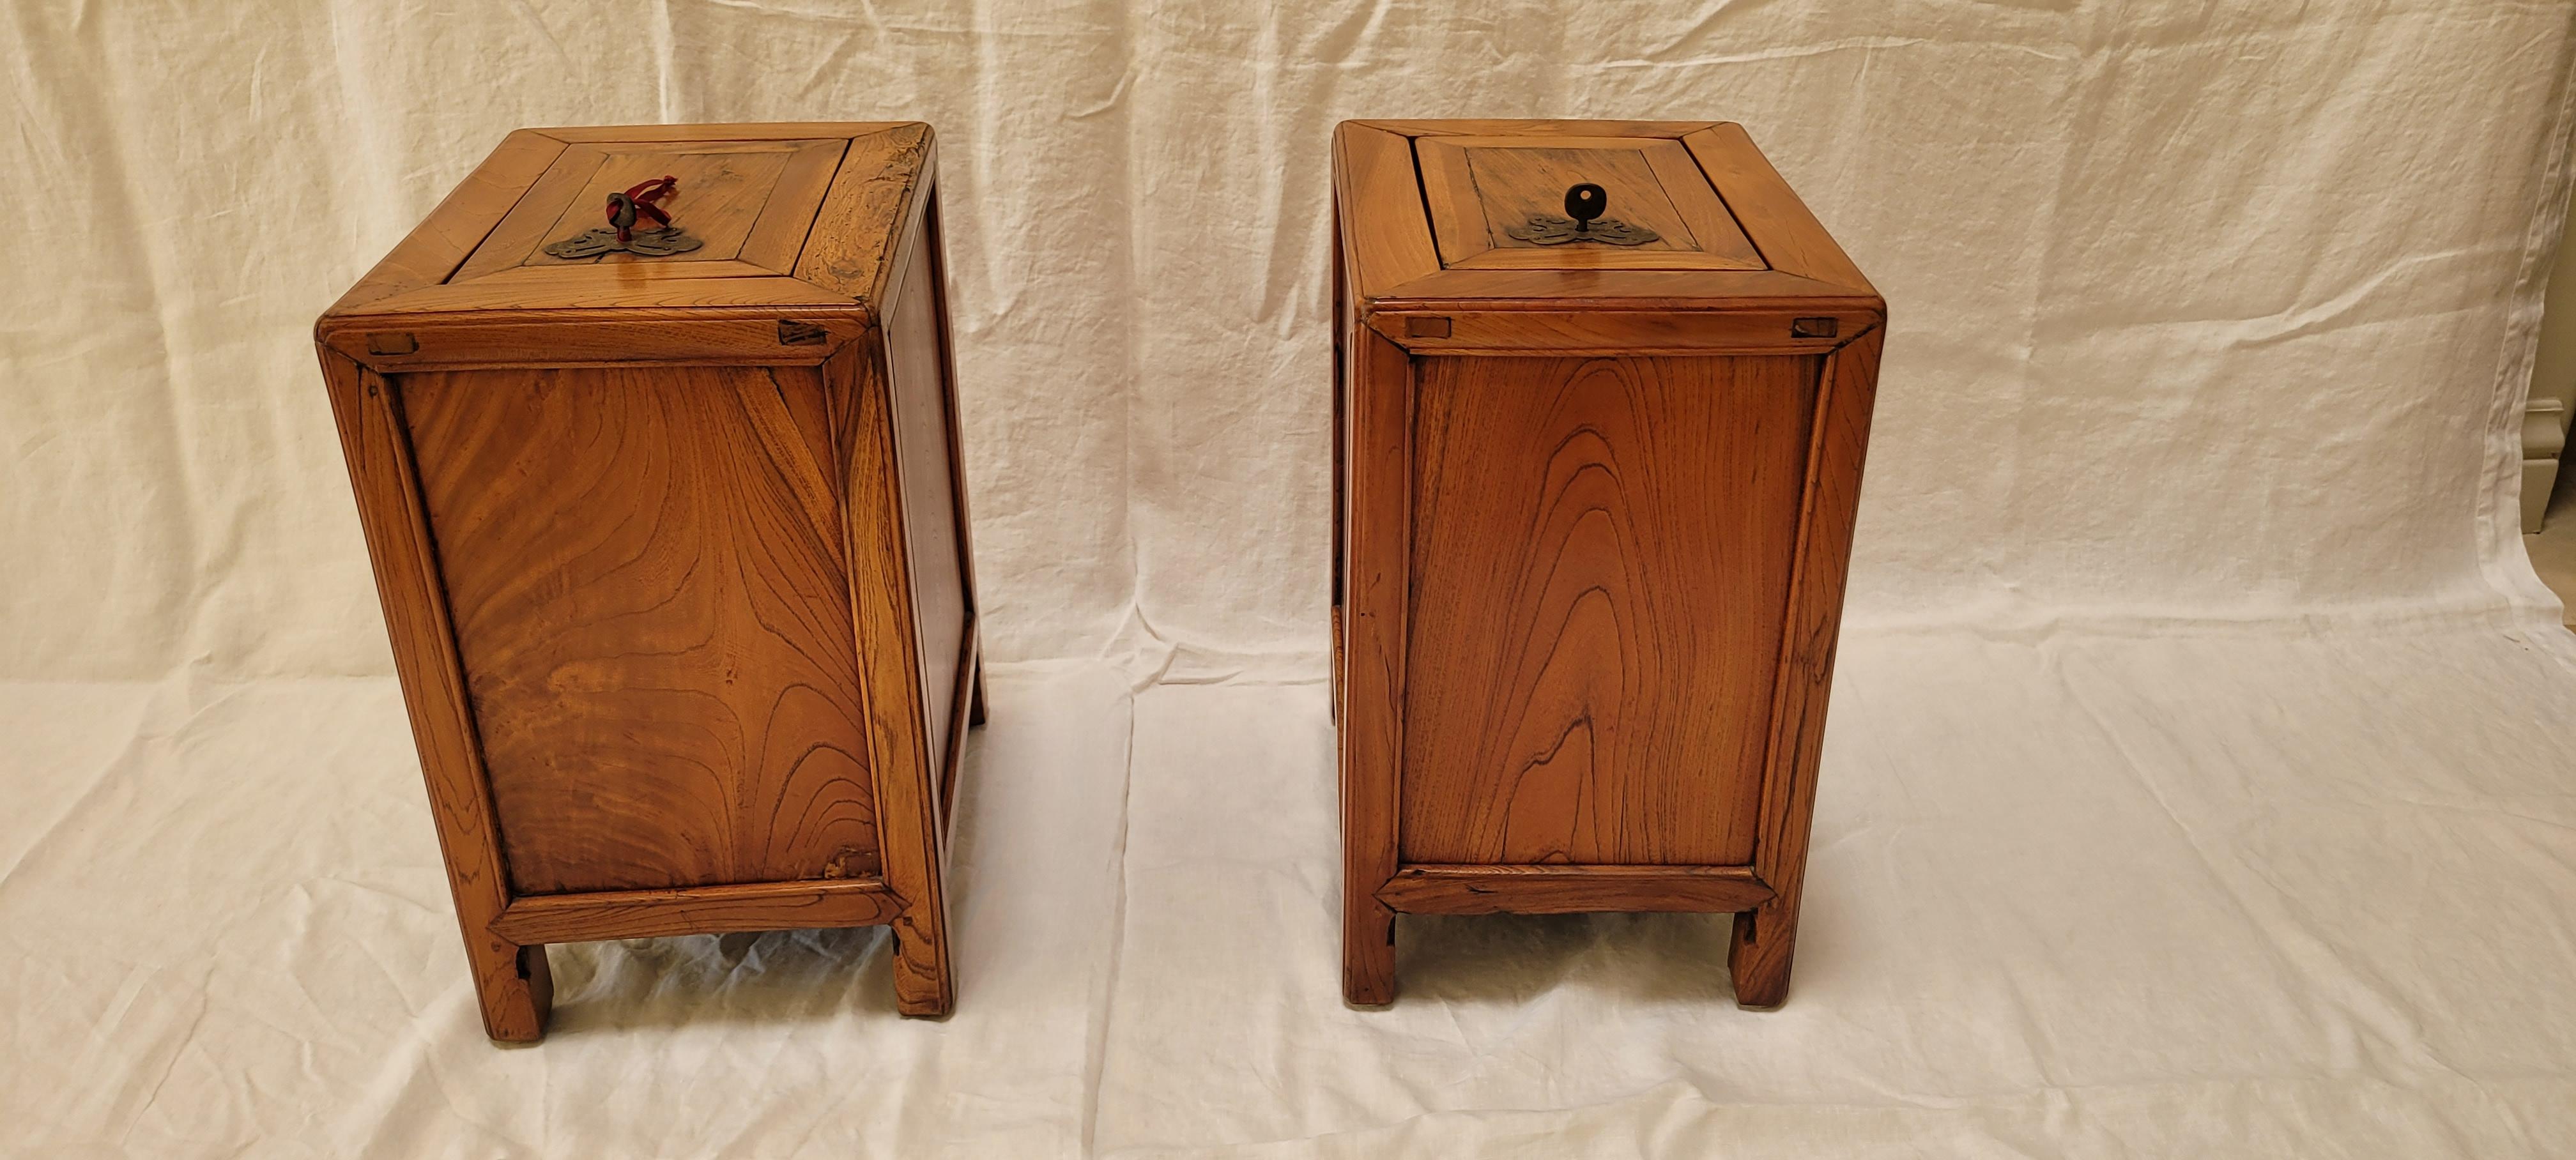 19th Century Pair of Money Chests For Sale 3